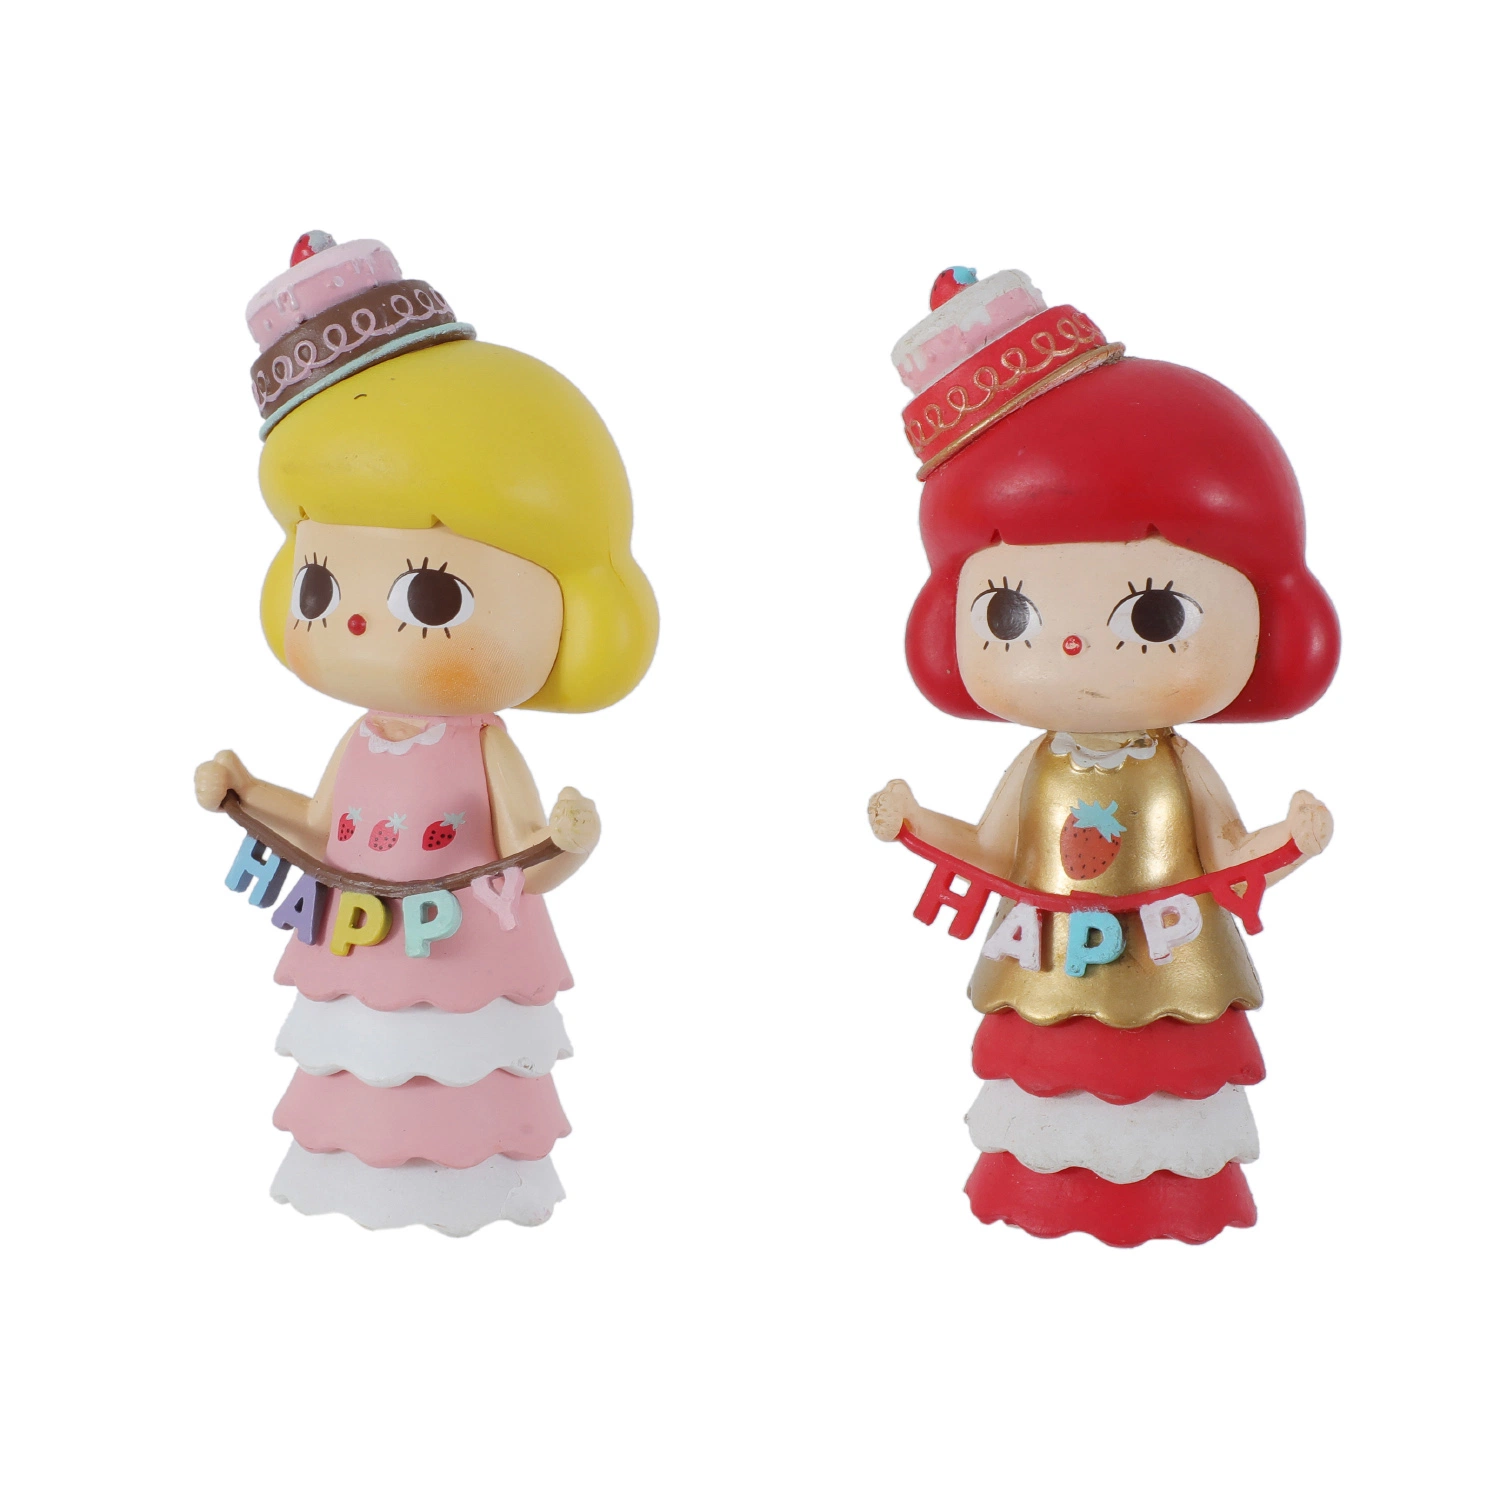 Plastic Toys Promotion Gifts PVC Toys